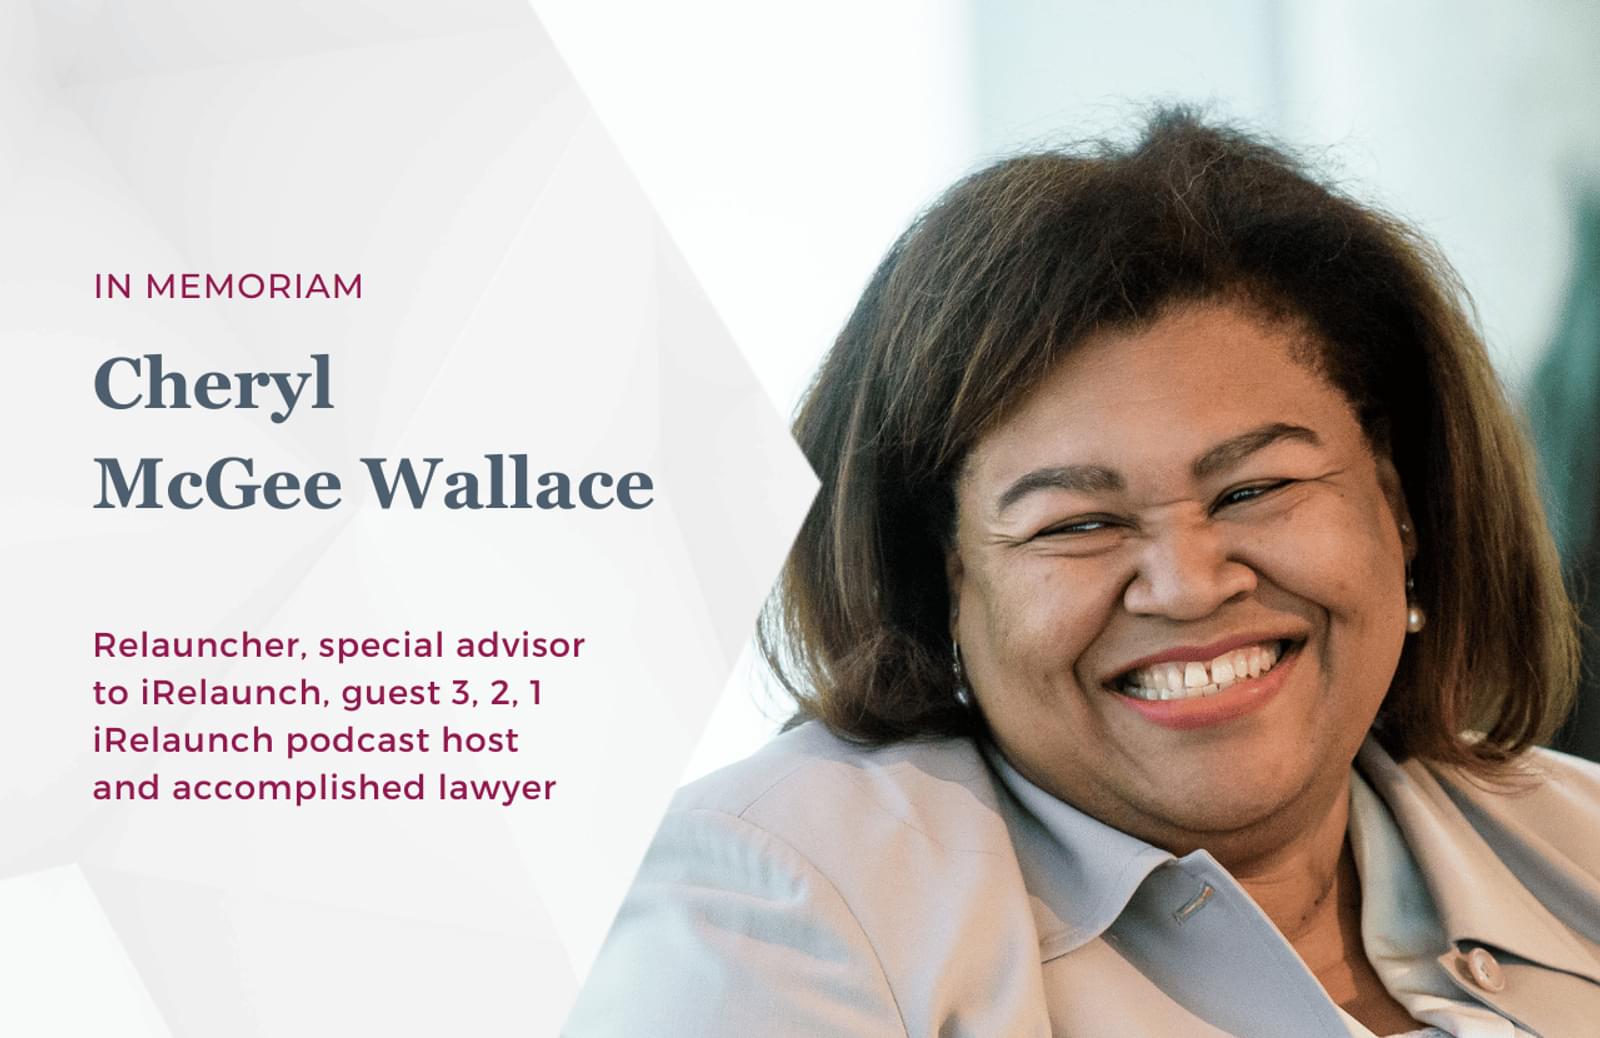 A smiling photo of Cheryl McGee Wallace. The text on the graphic reads: IN MEMORIAM, Cheryl McGee Wallace. Relauncher, special advisor to iRelaunch, guest 3, 2, 1 iRelaunch podcast host and accomplished lawyer.